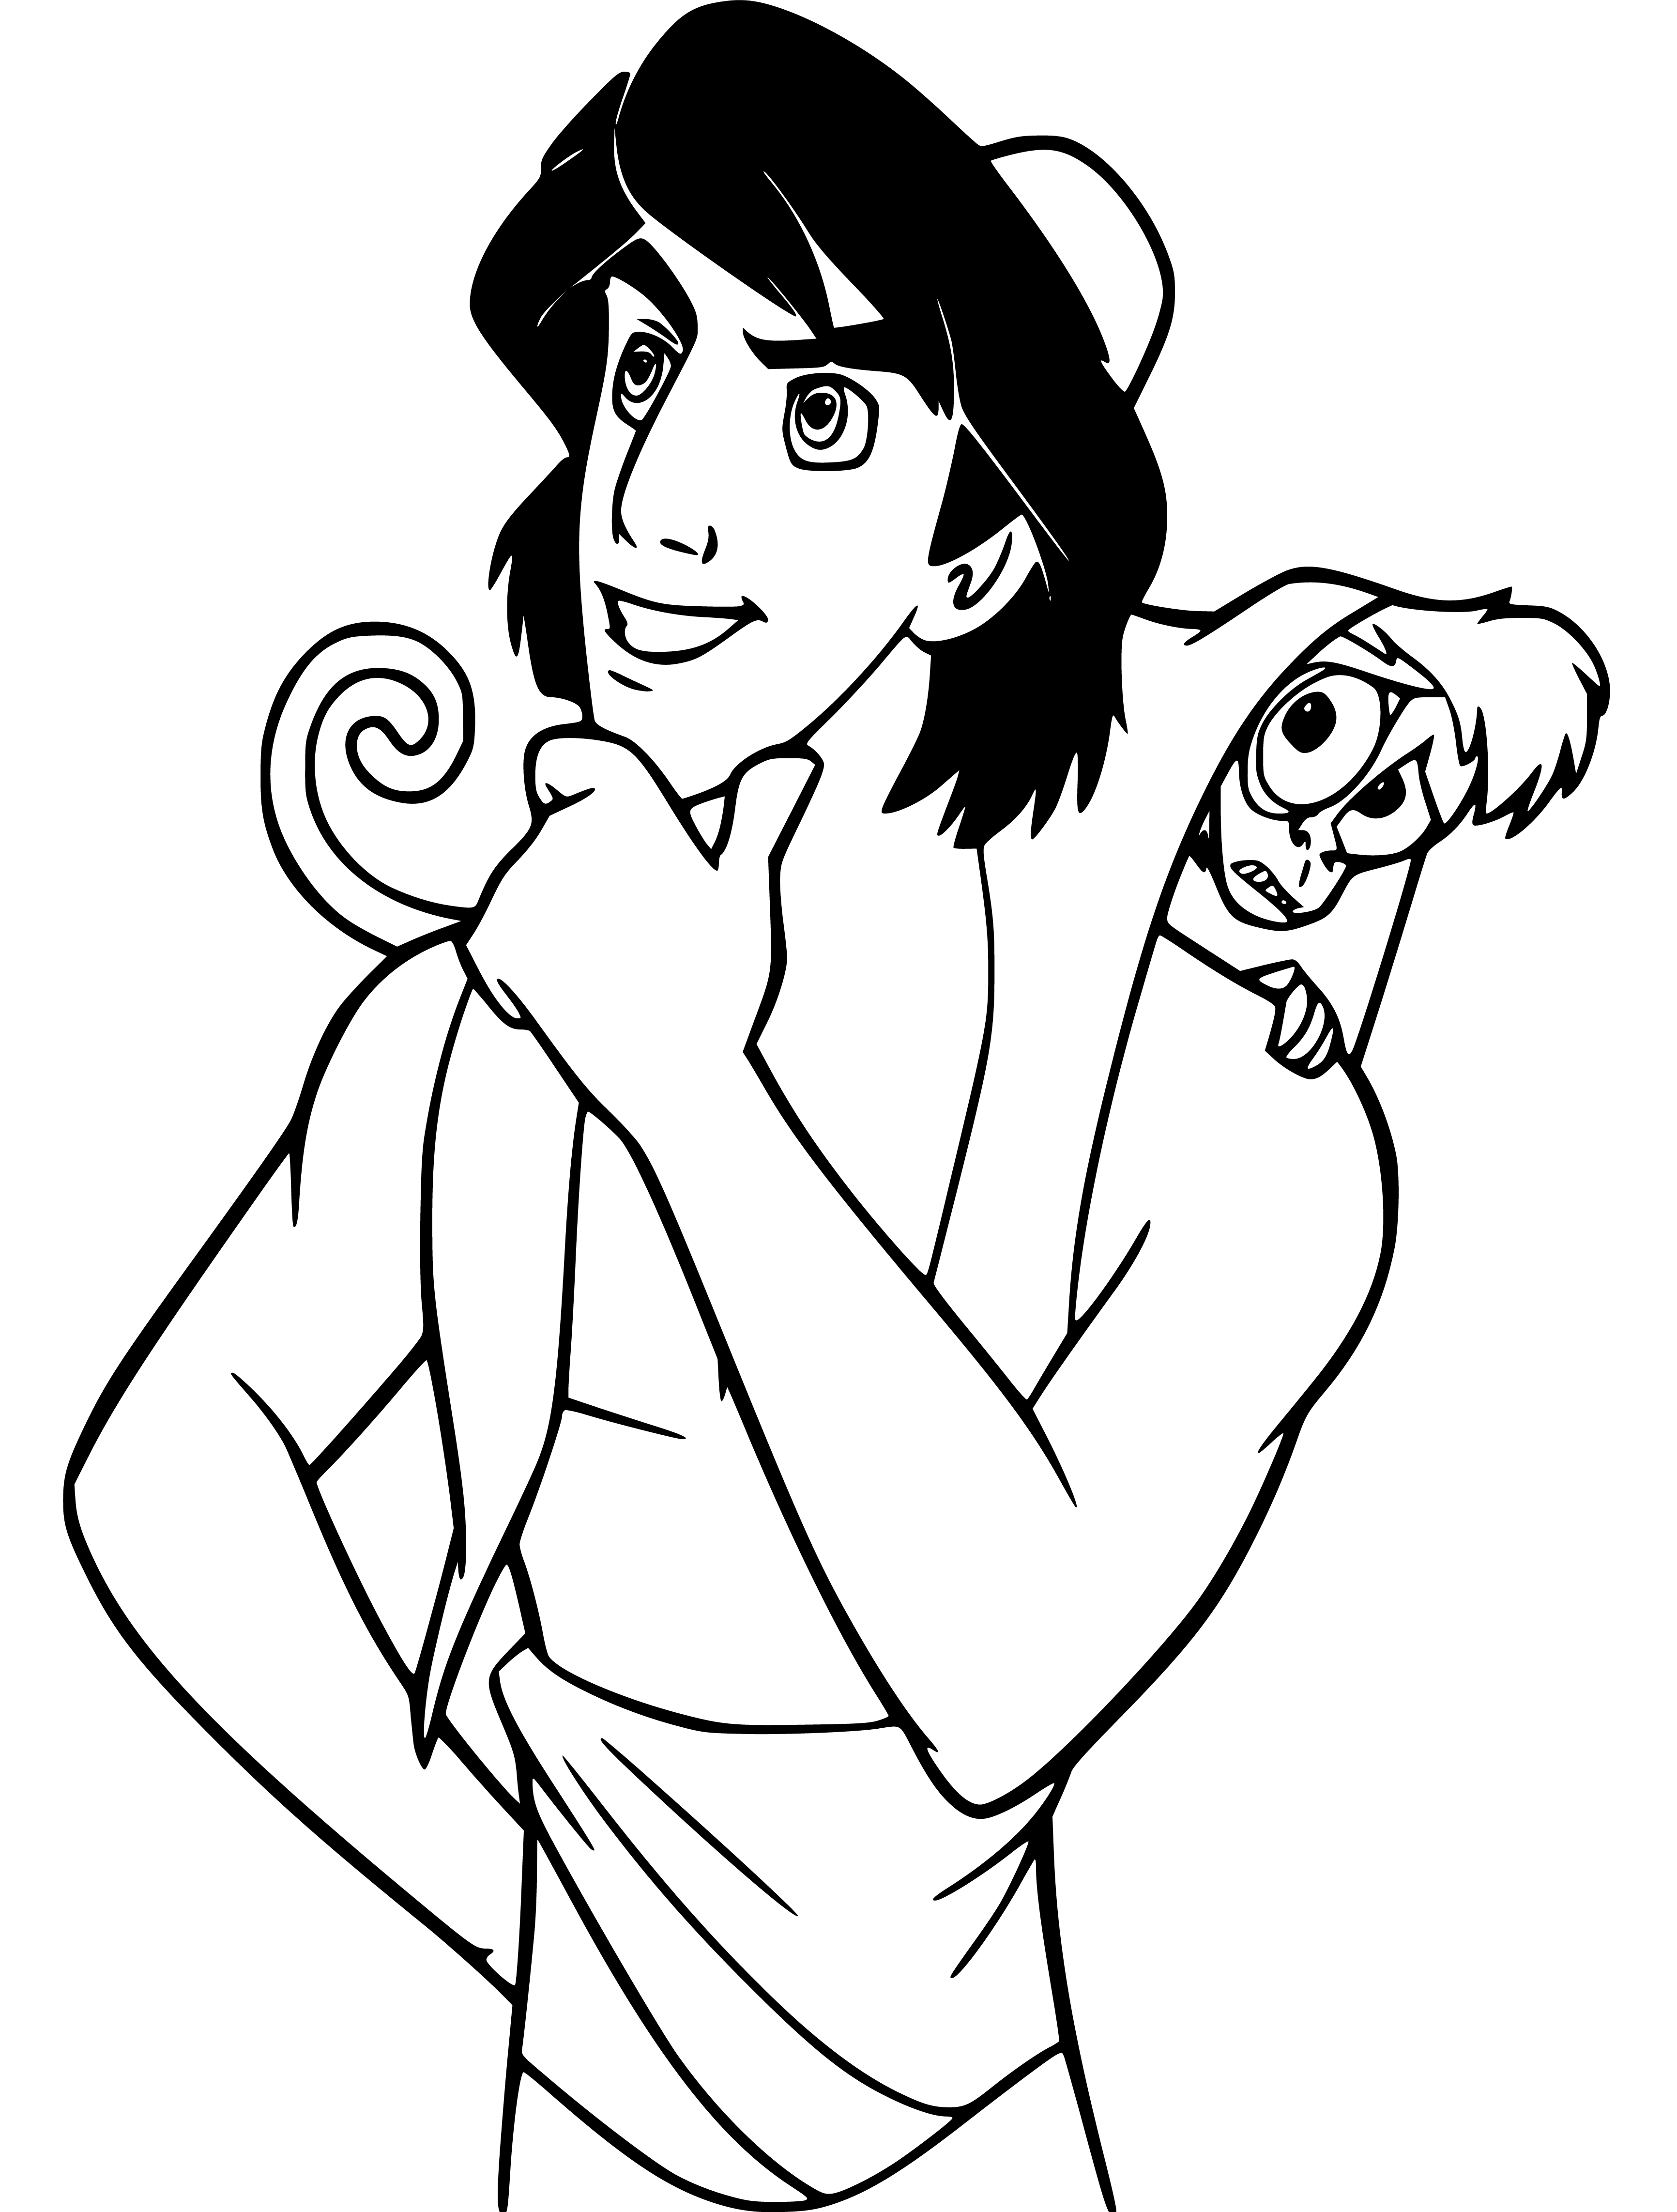 Printable Aladdin Thinking Coloring Page for kids.